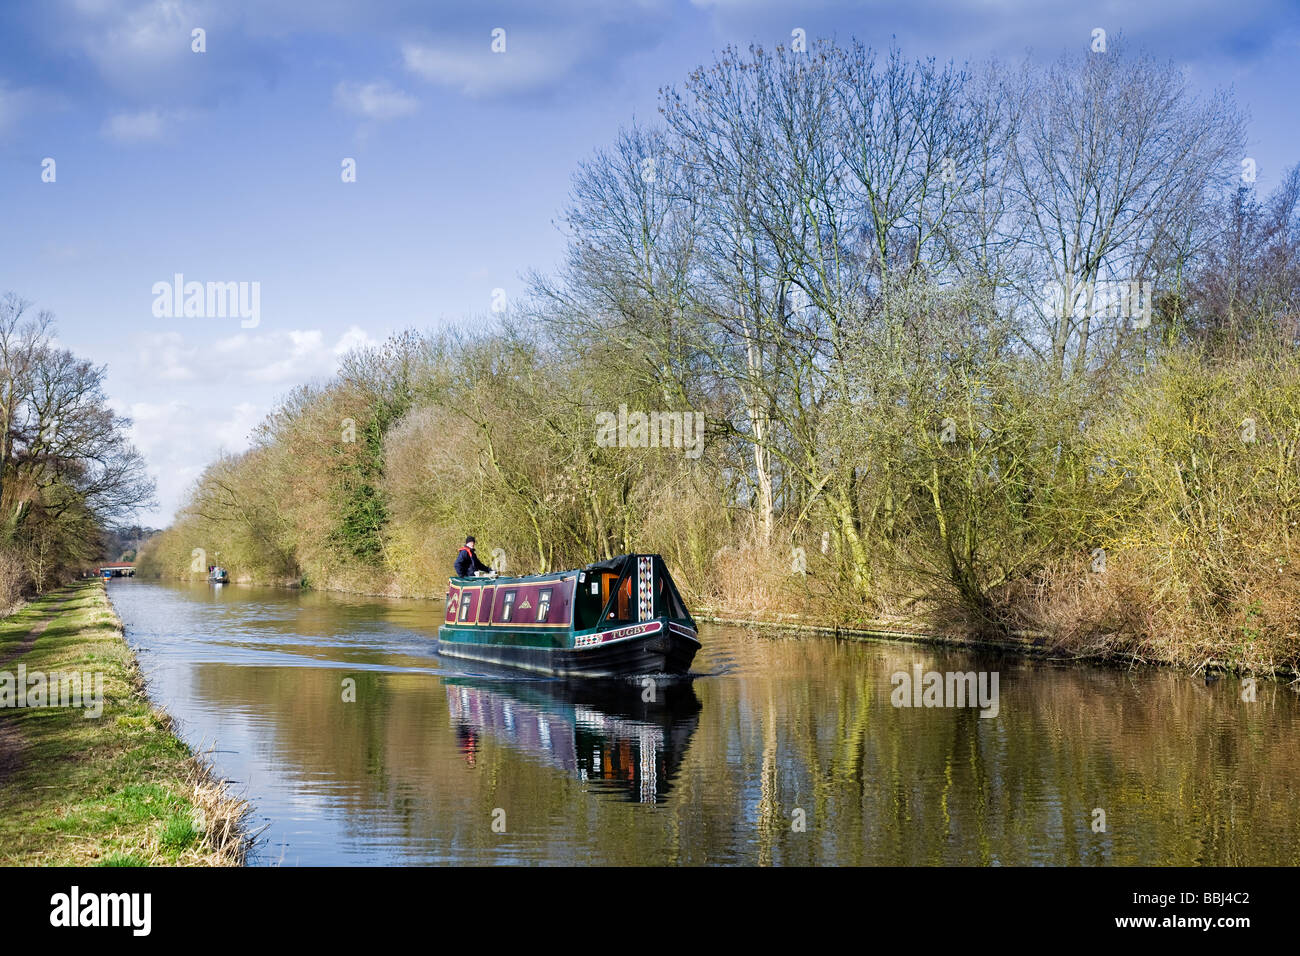 UK, England, Greater London, The Grand Union Canal and Narrowboat 'Tugby' near Denham Green Stock Photo